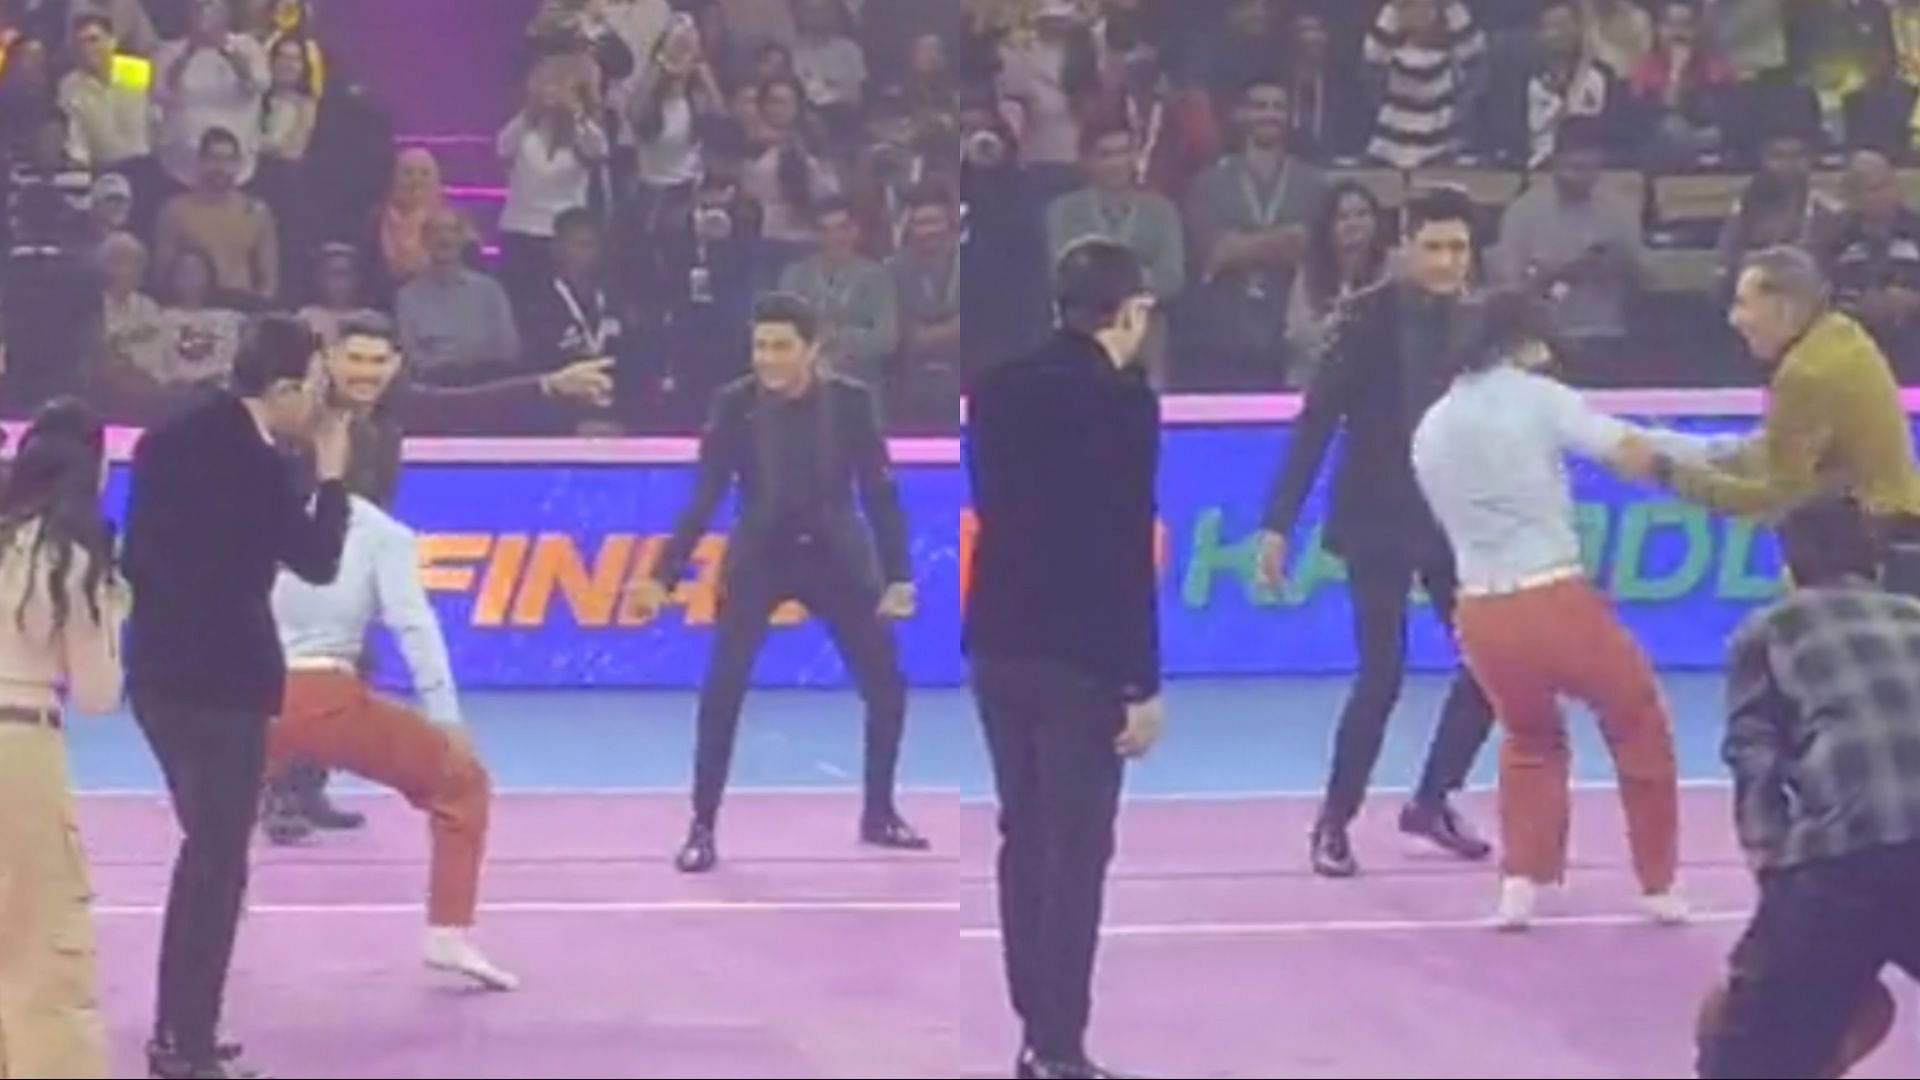 Ranveer Singh is a special guest at the PKL 9 Final (Image: Twitter)